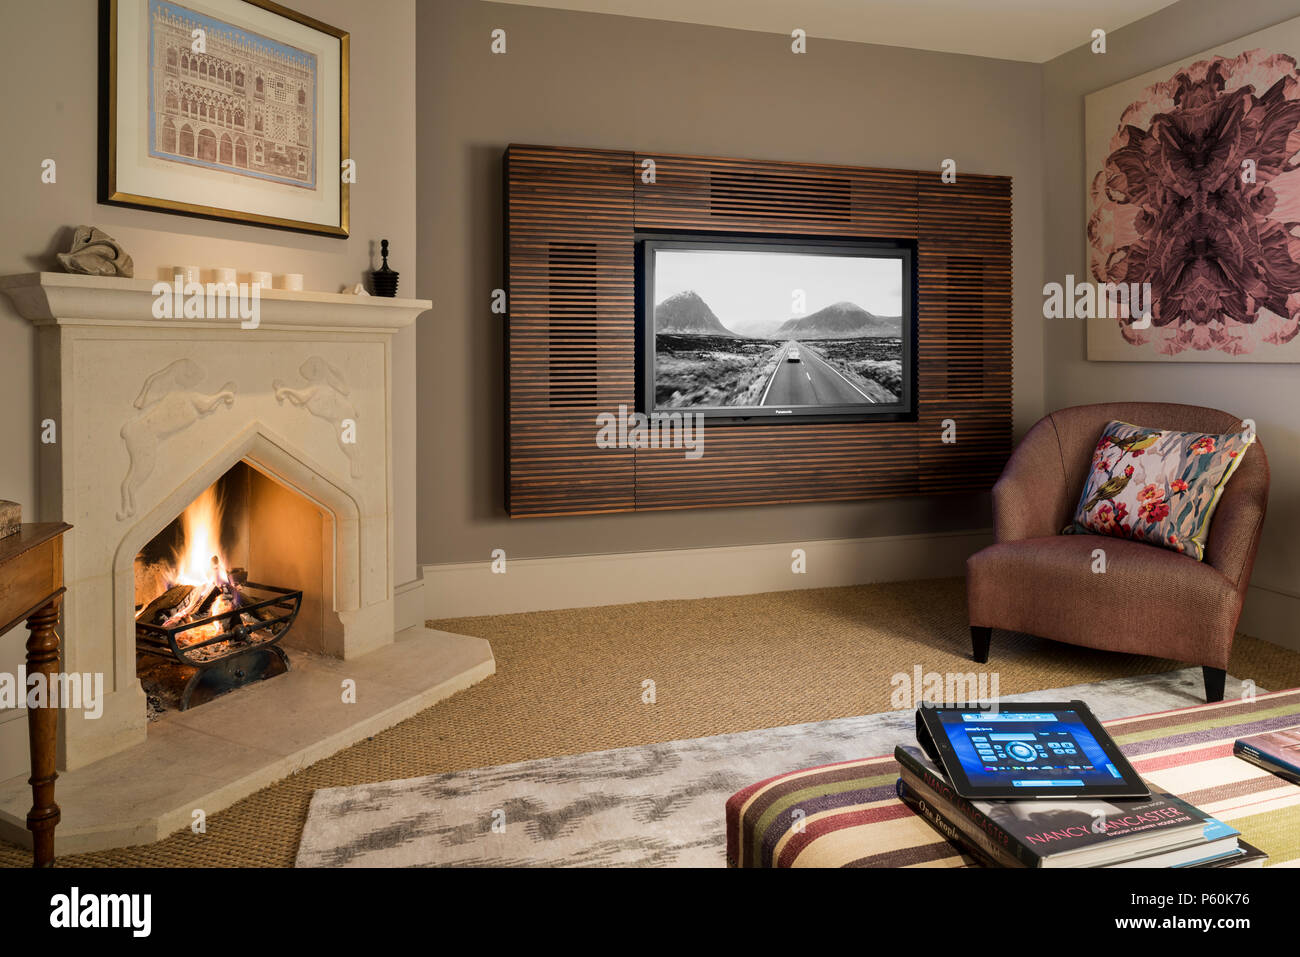 Lit fire by flat panel television in living room Stock Photo